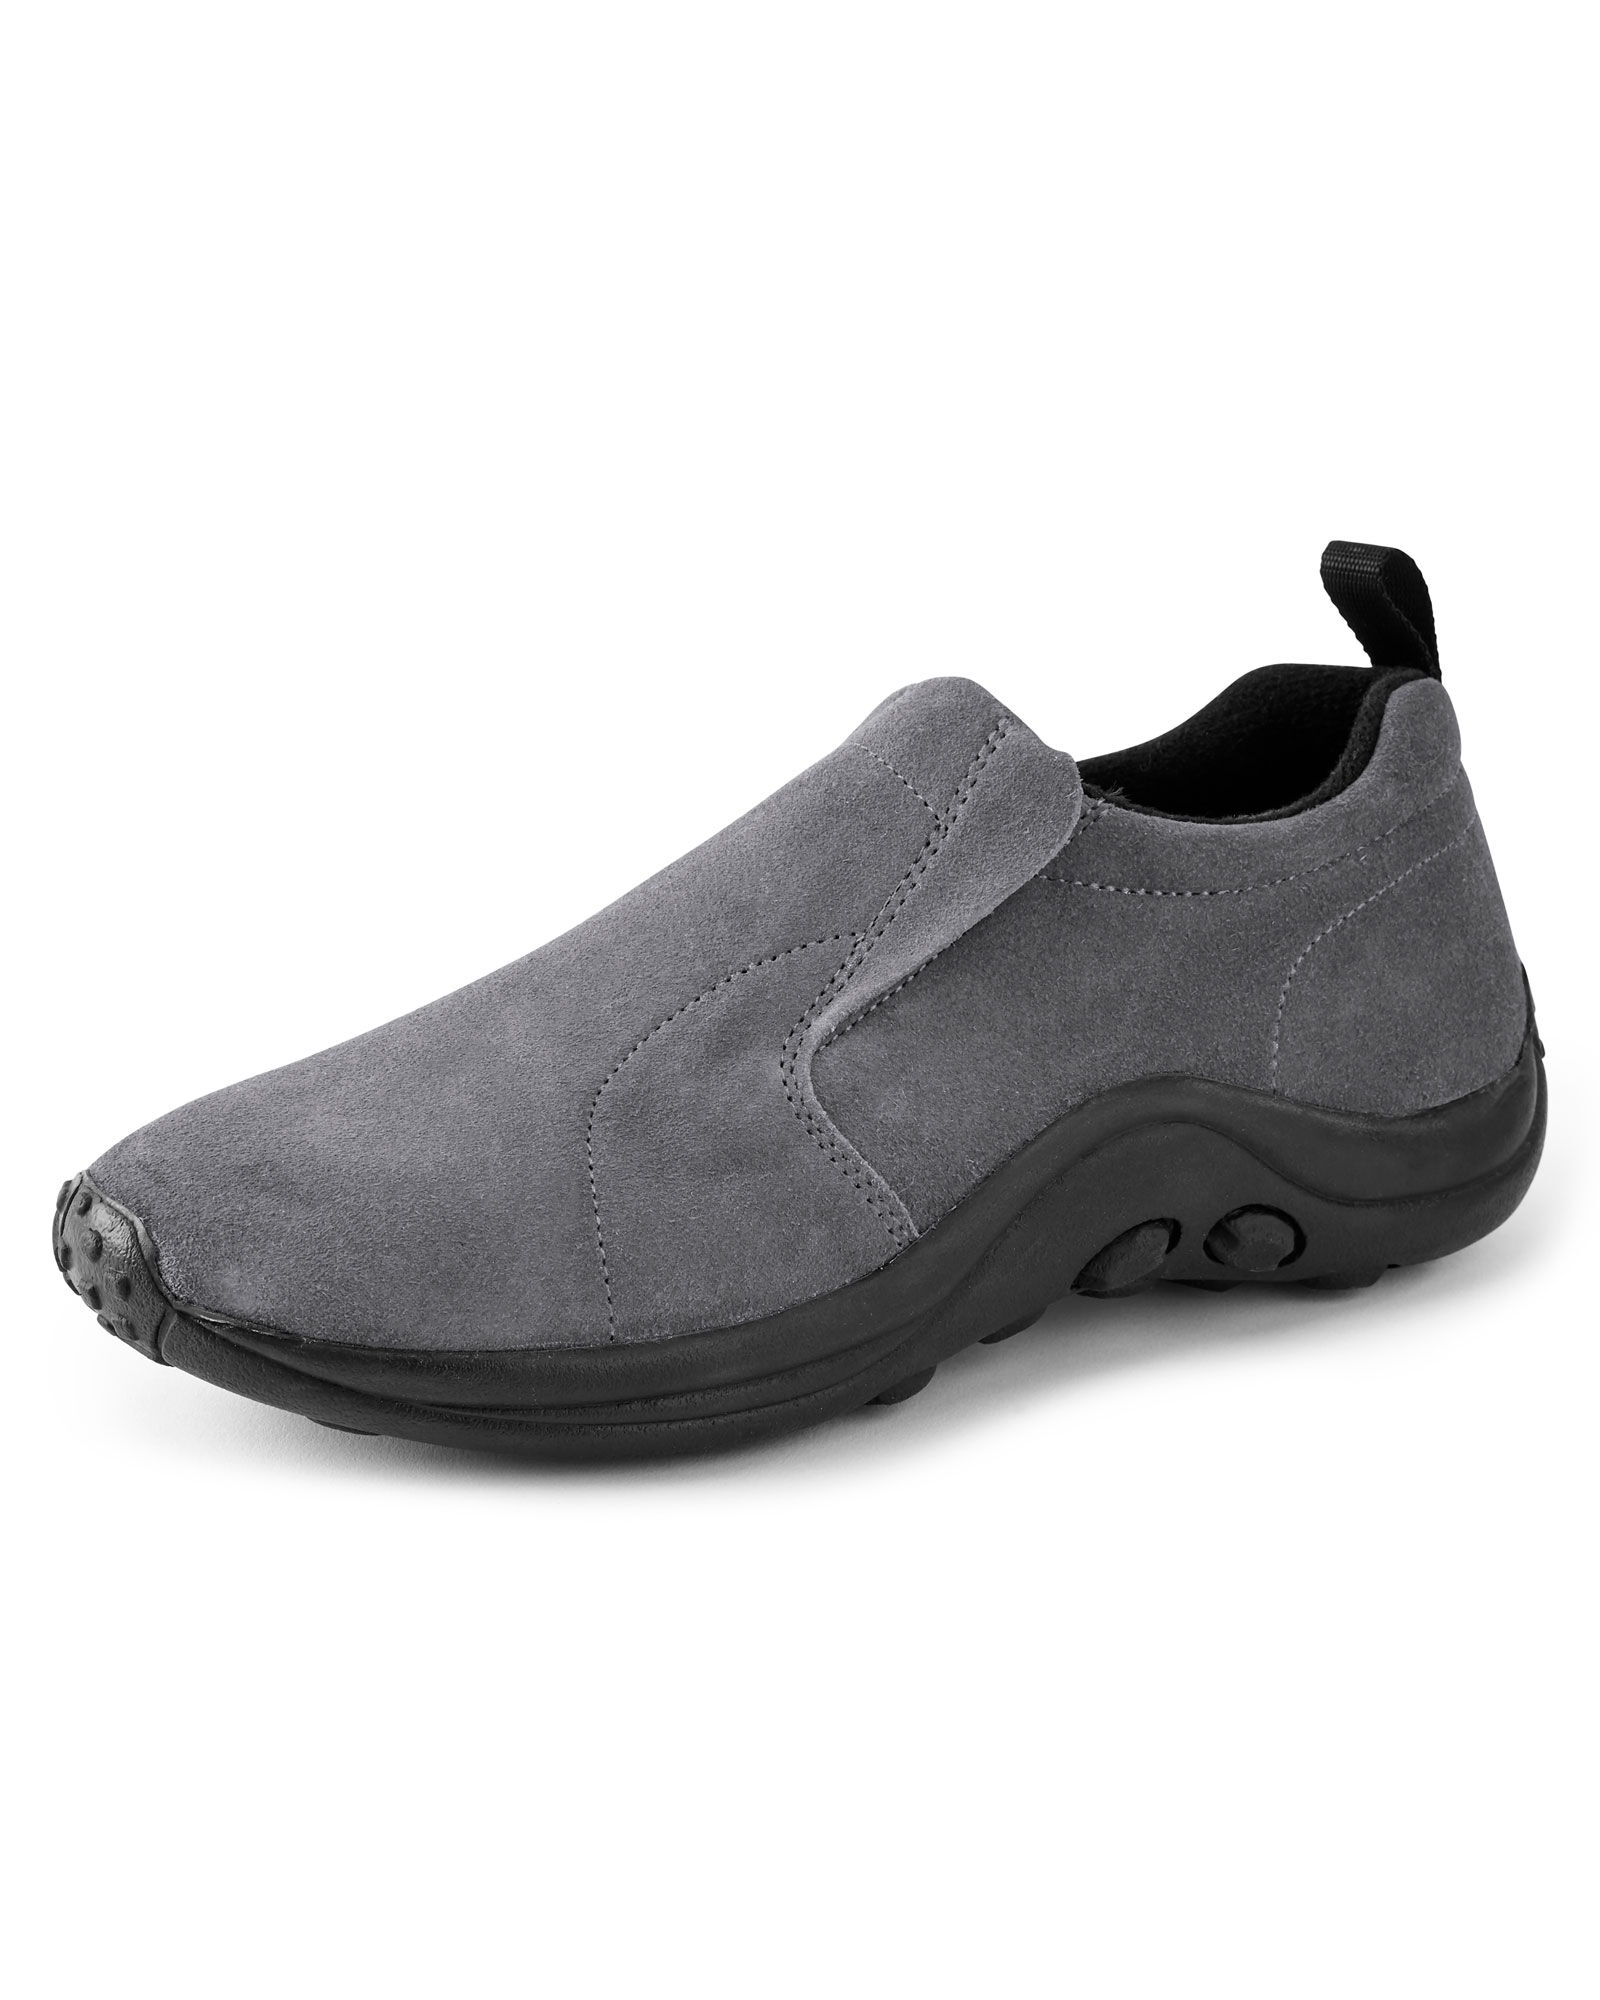 Women's Comfort Fit Suede Slip-Ons at 